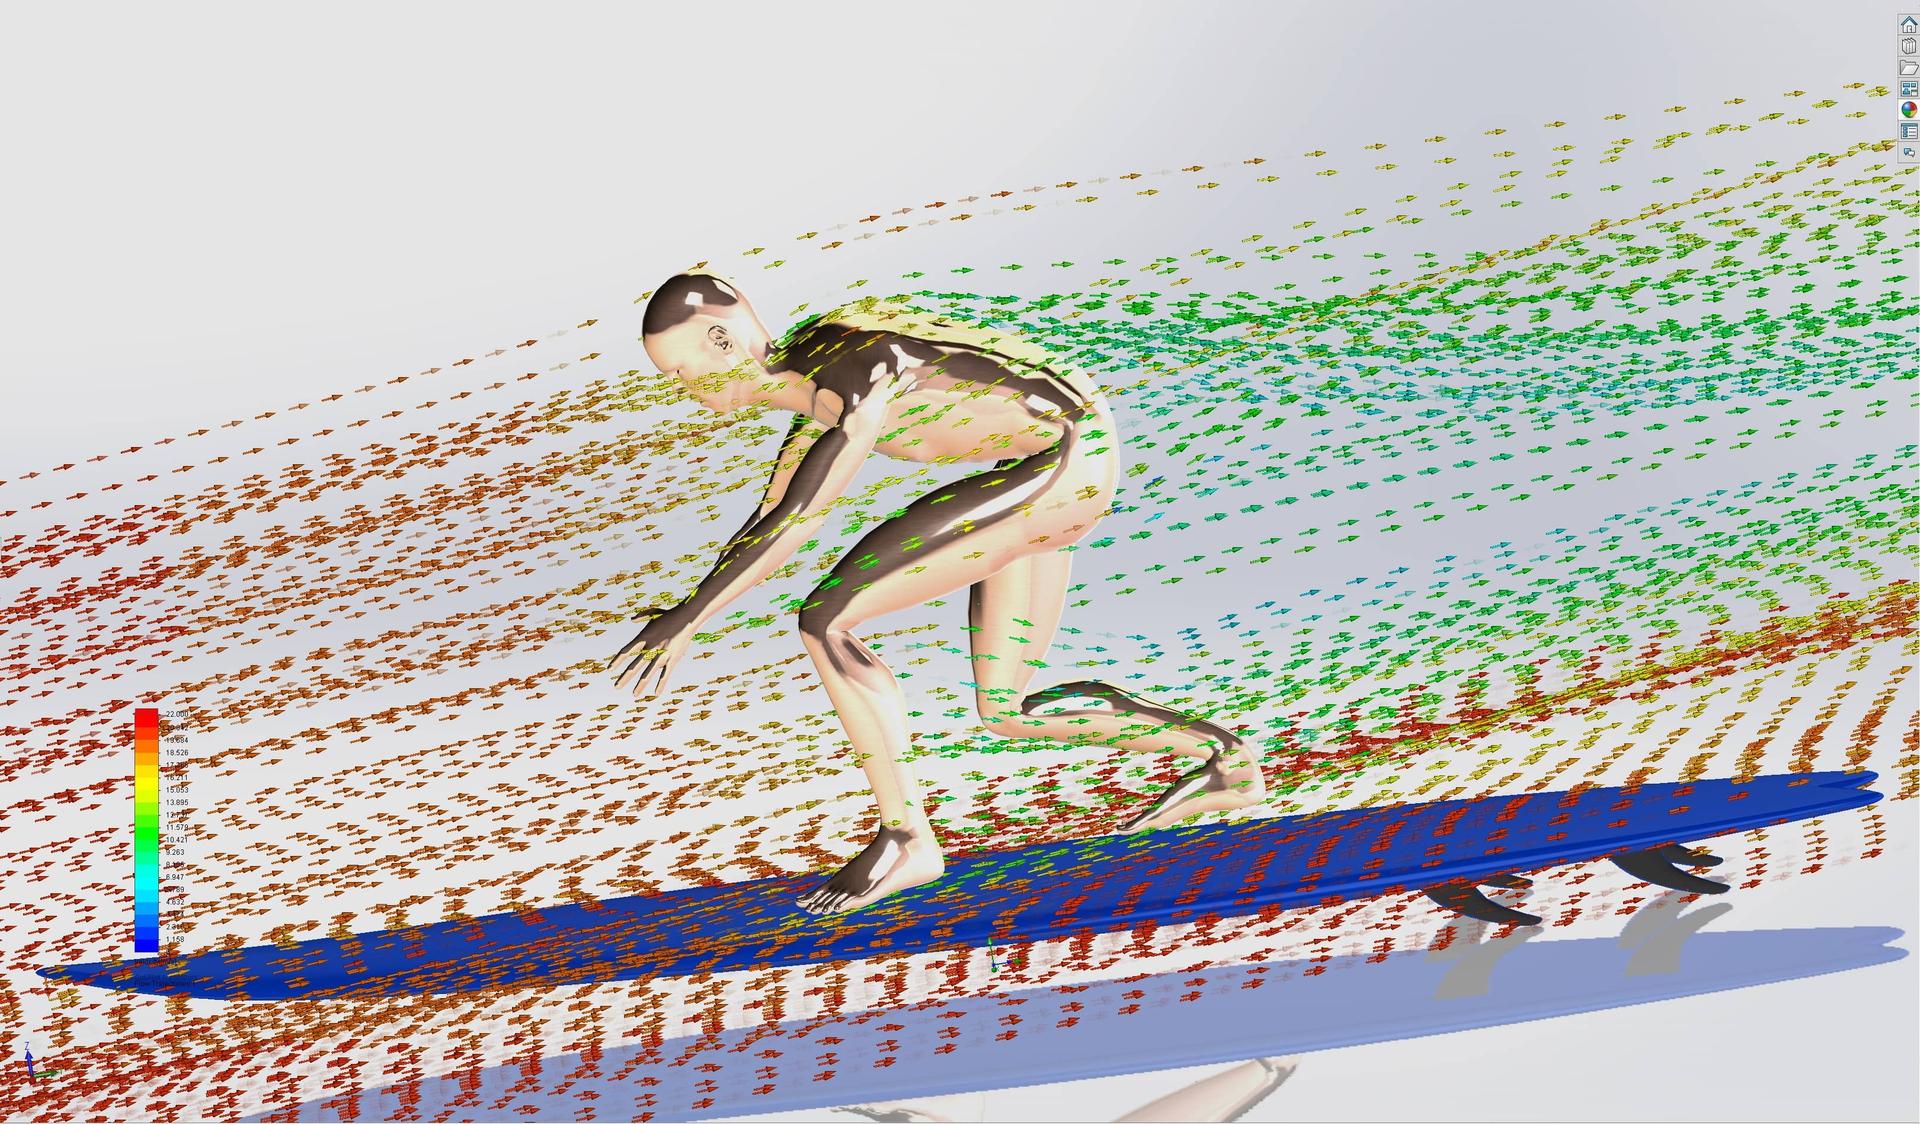 Aerodynamic analysis of Ian Walsh on his surf board - image by Falcon Pursuit